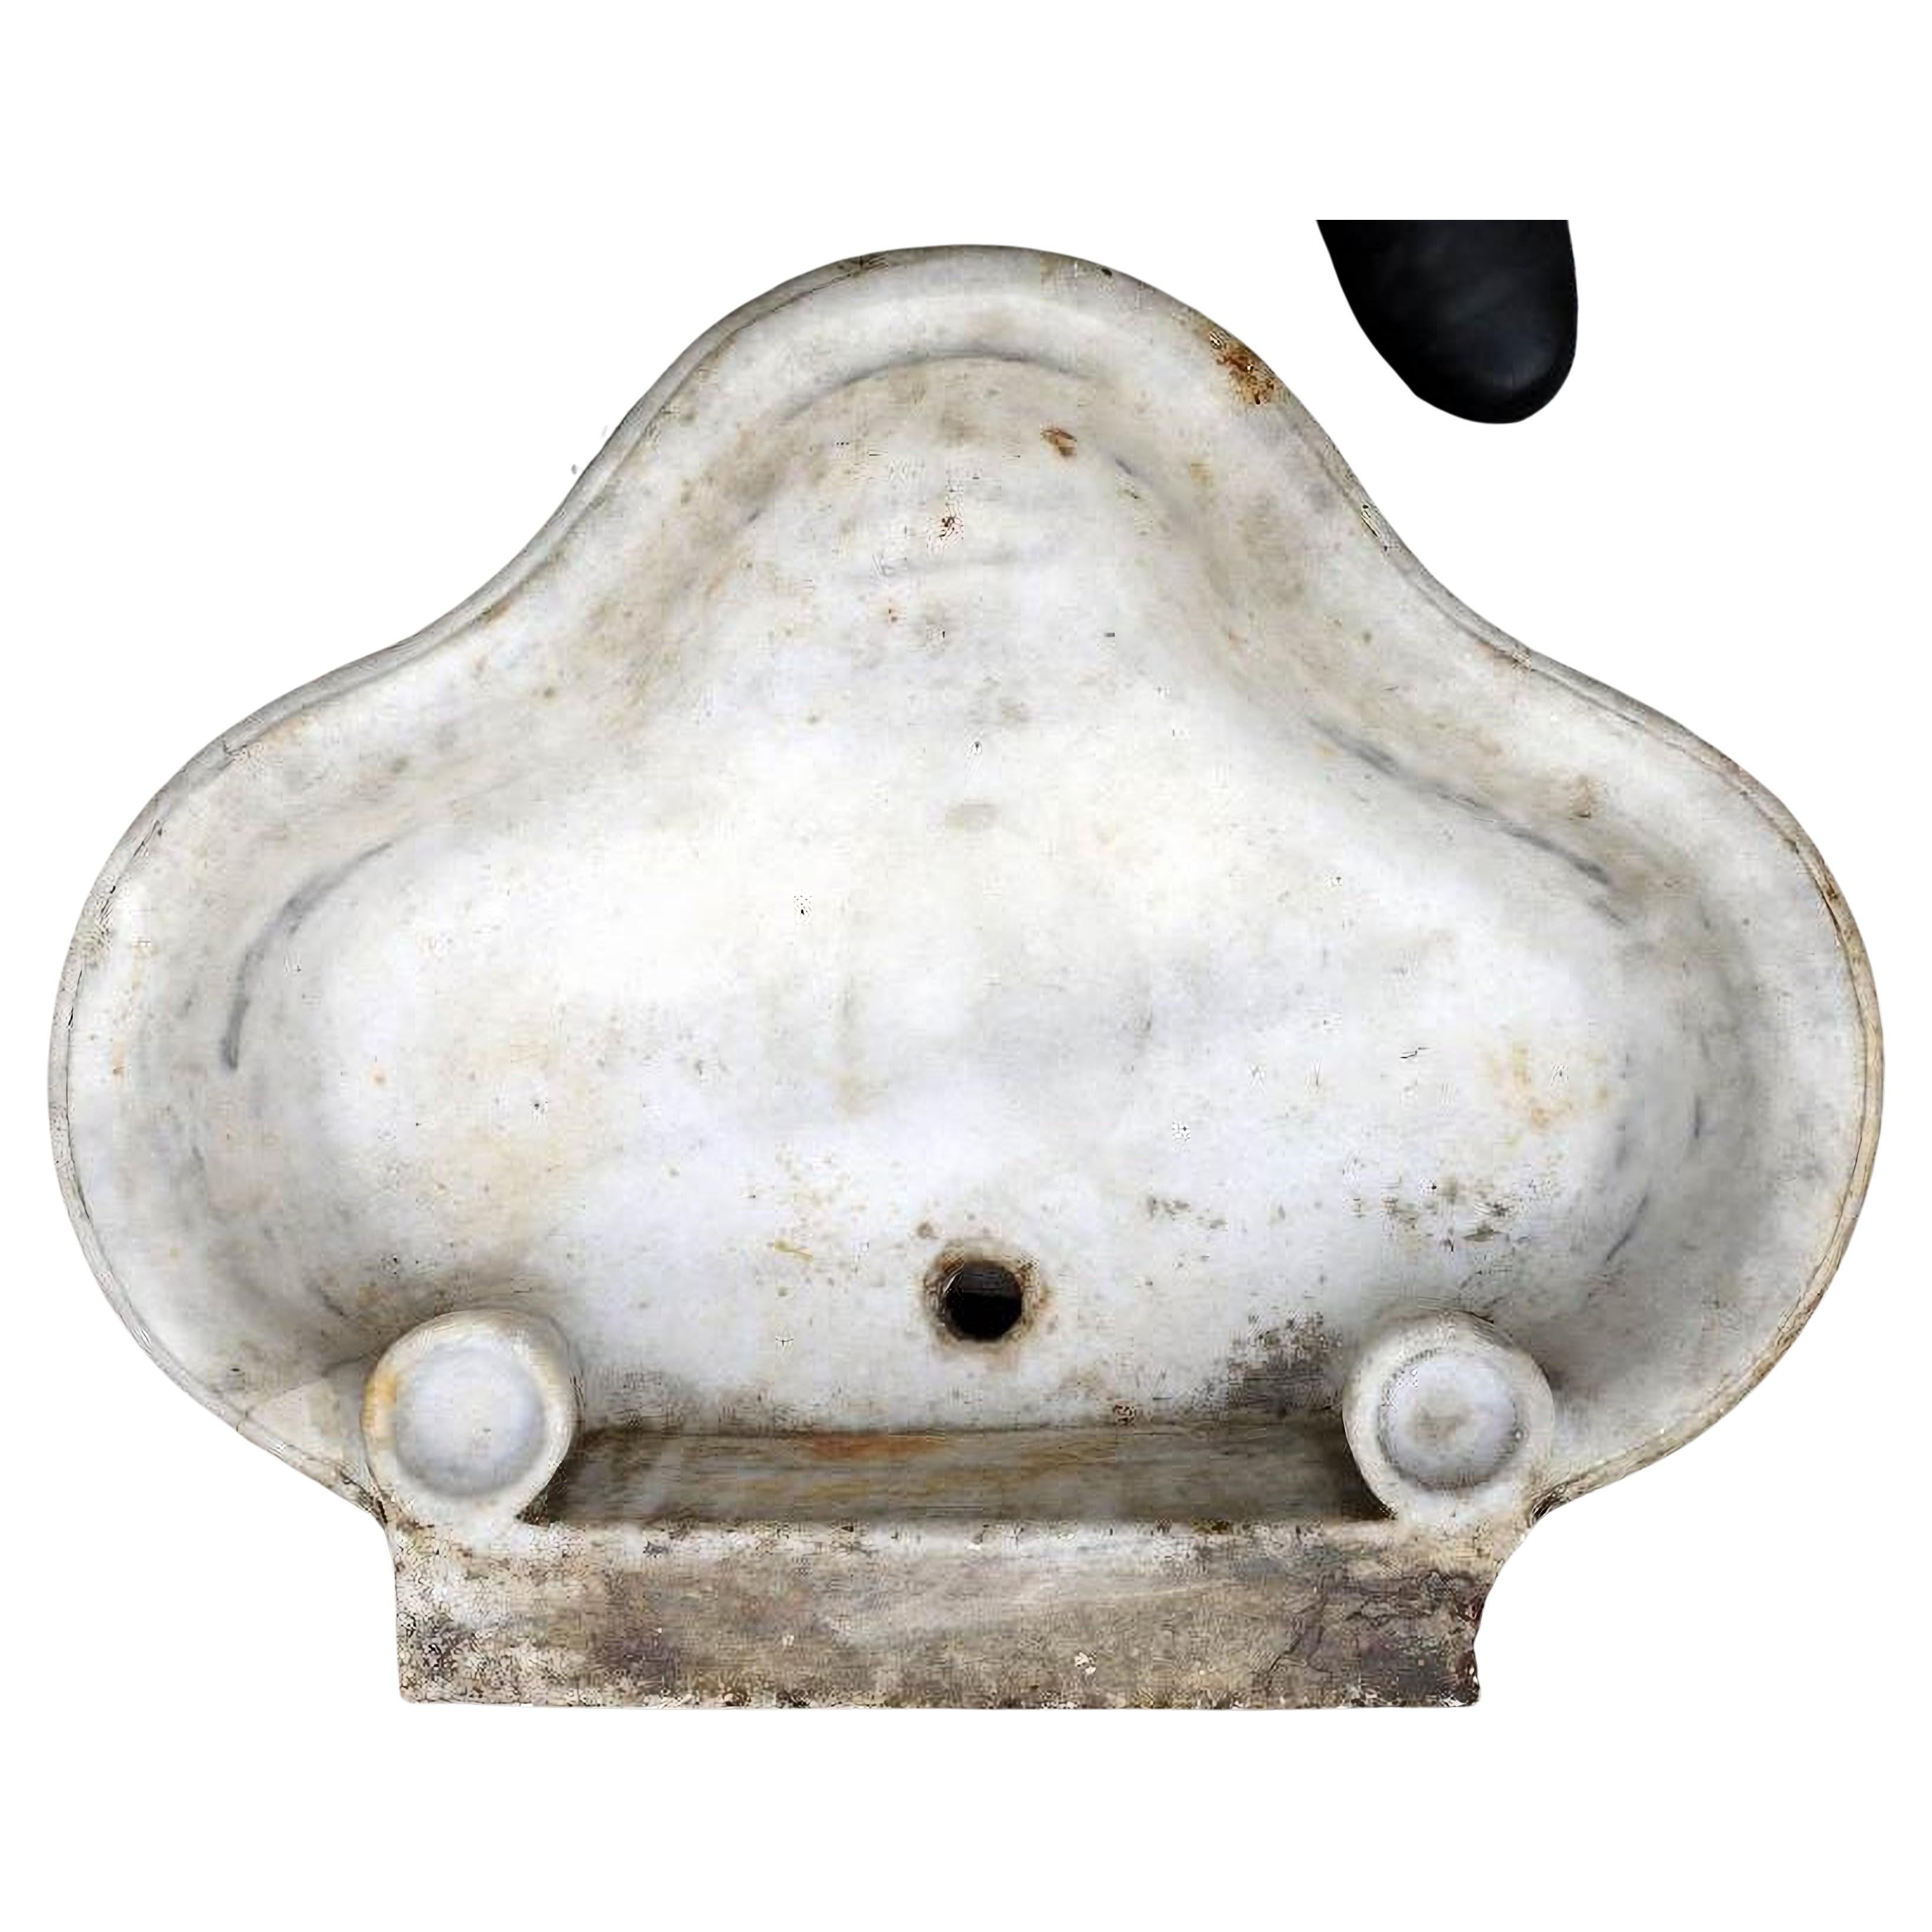 ANTIQUE ITALIAN TRILOBE SINK IN WHITE CARRARA MARBLE 18th Century

Rare original antique Italian sink, in white Carrara marble.
The trefoil sinks are difficult to find, this example is from the 18th century

HEIGHT 52cm
WIDTH 67cms
MANUFACTURE